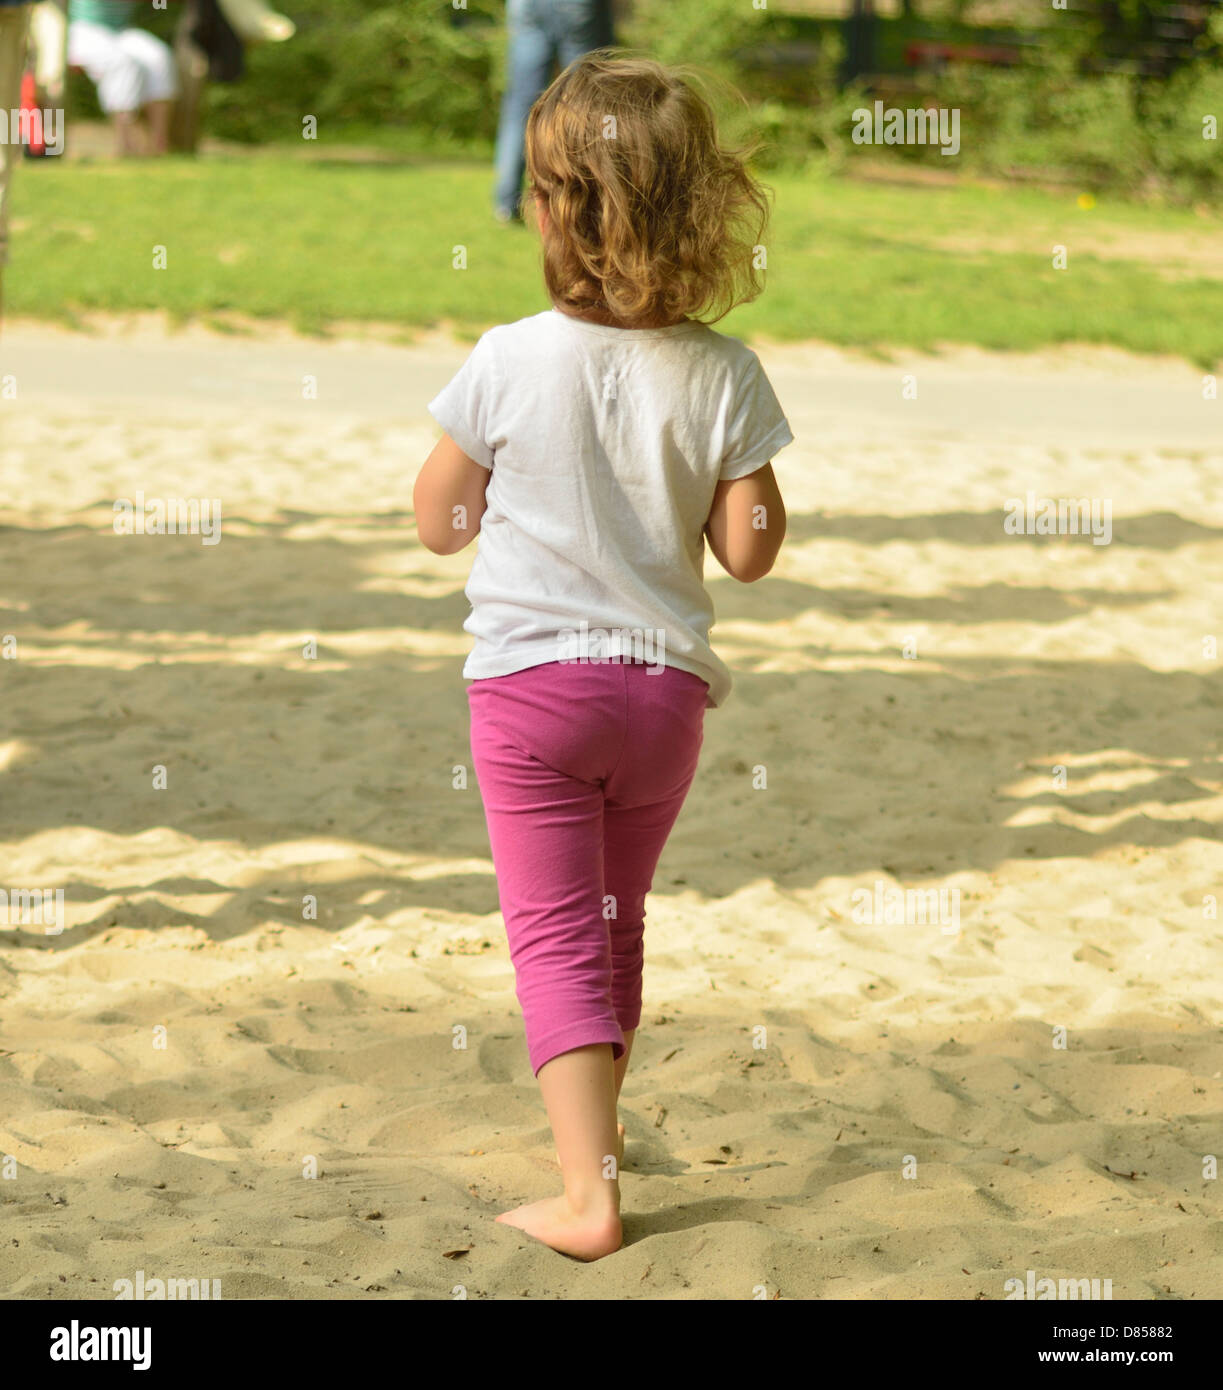 4 year old little girl walks in the sand on playground barefoot Stock Photo